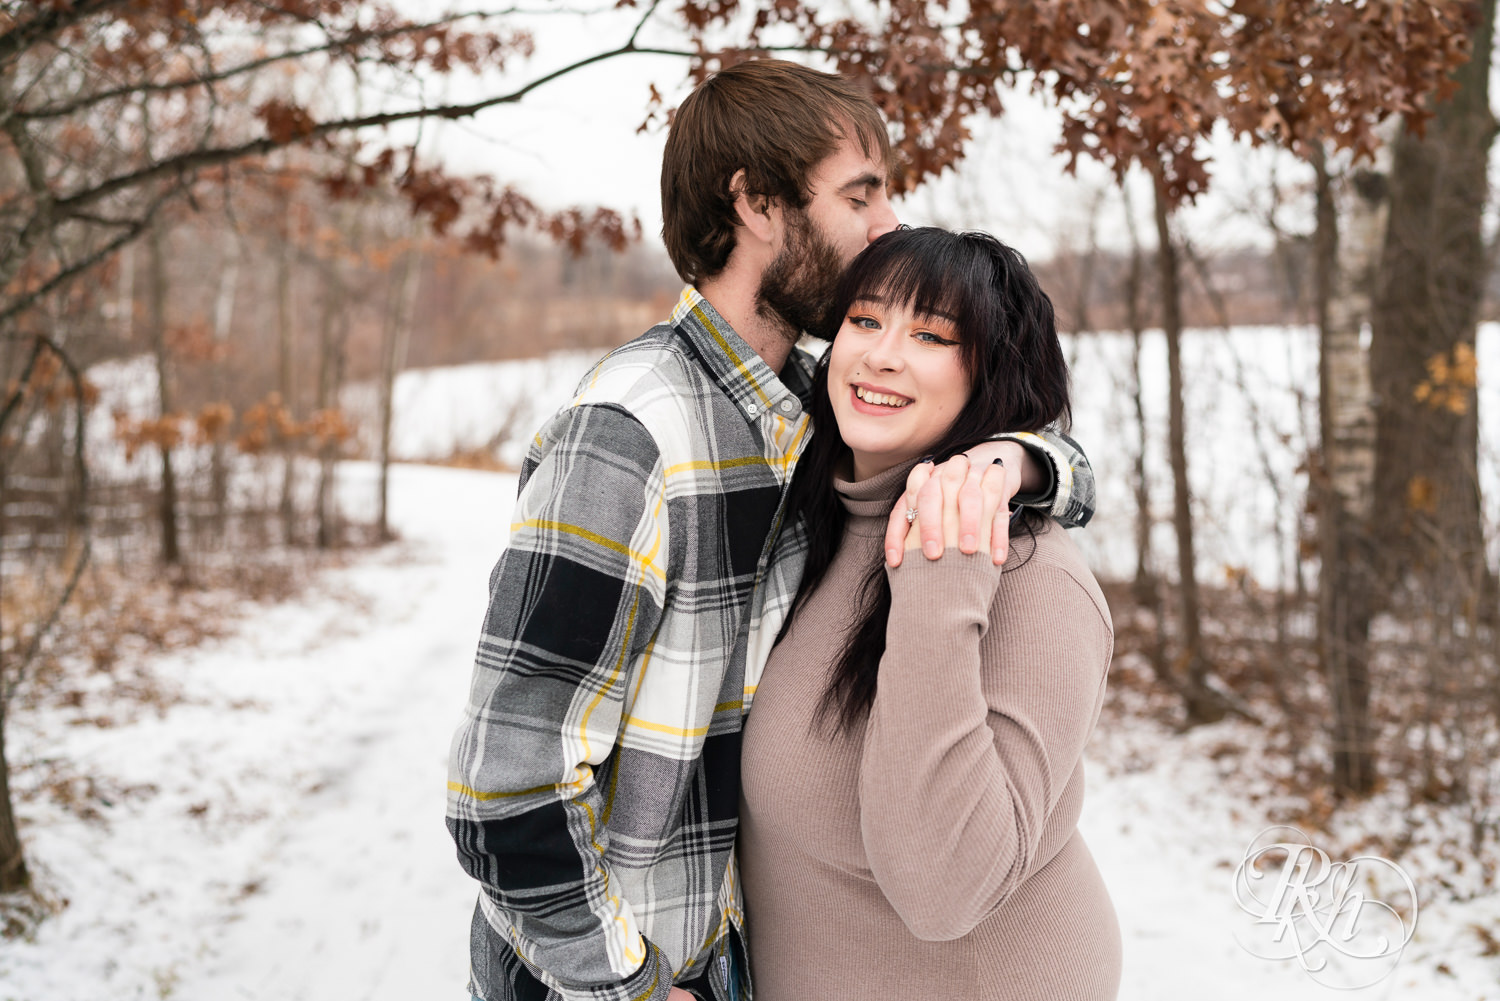 Man in flannel and woman in brown dress smile during winter engagement photos at Lebanon Hills Regional Park in Eagan, Minnesota.